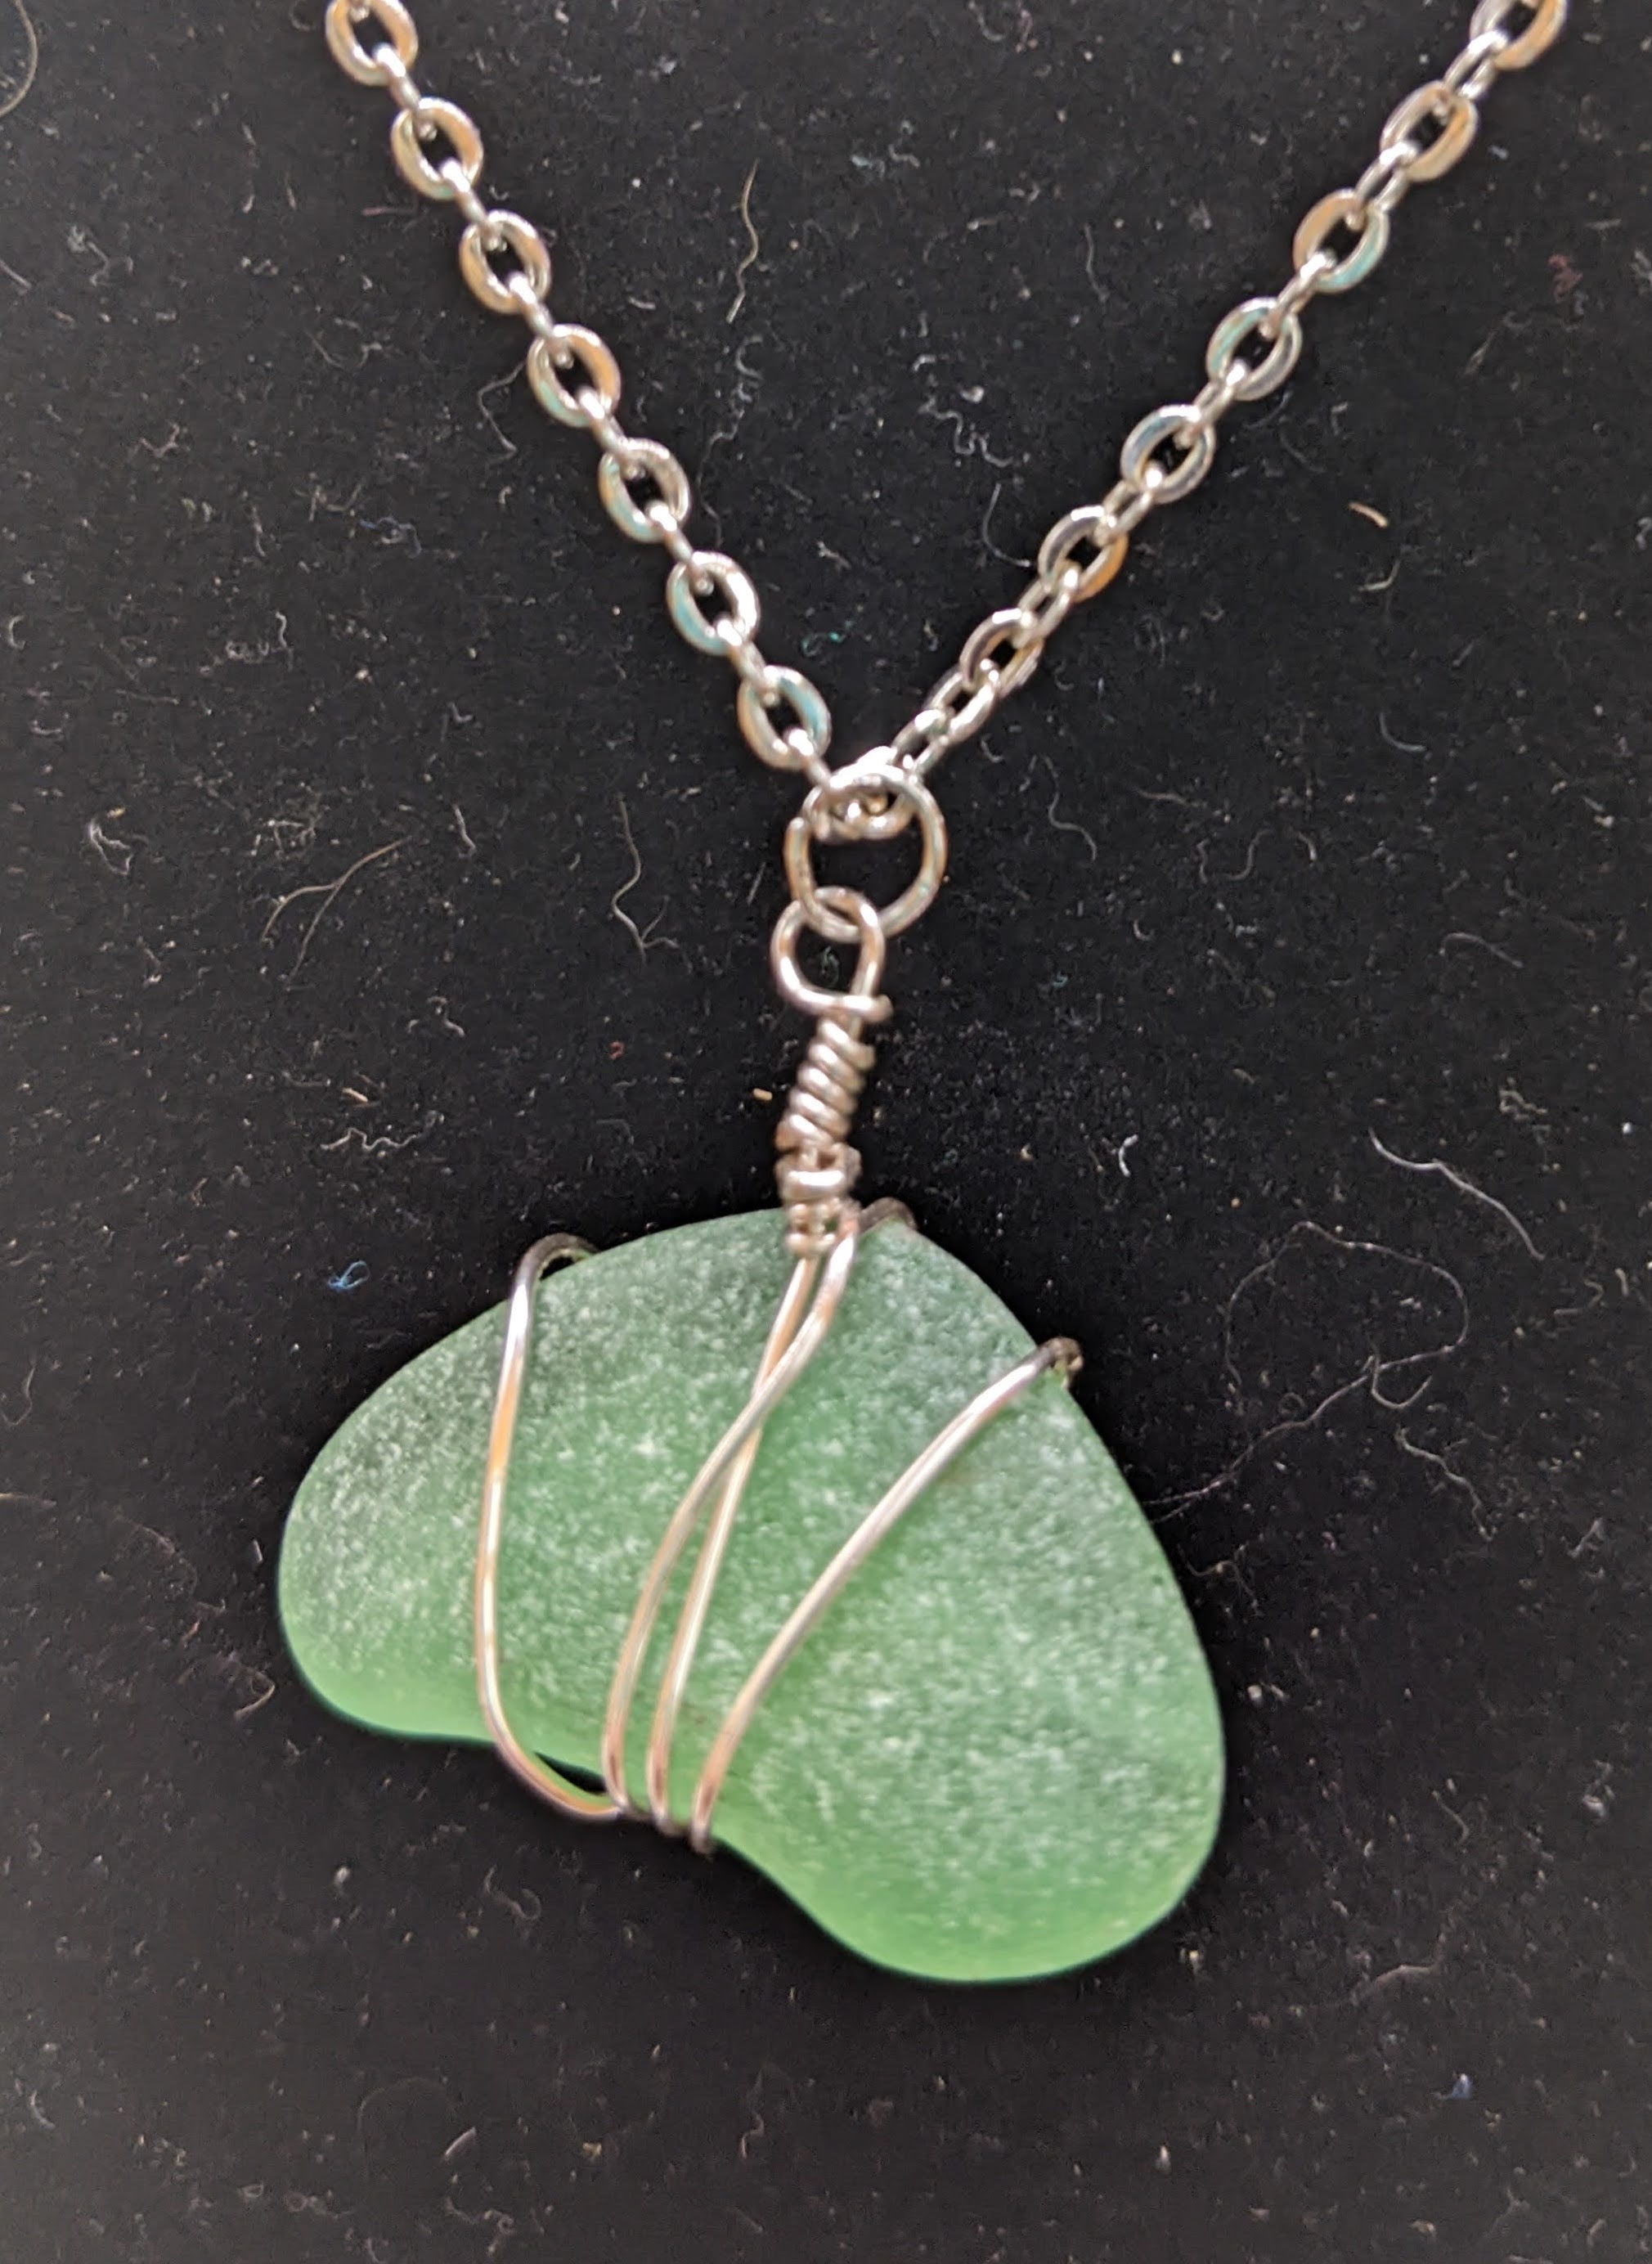 Green seaglass and yellow beads wire-wrapped necklace